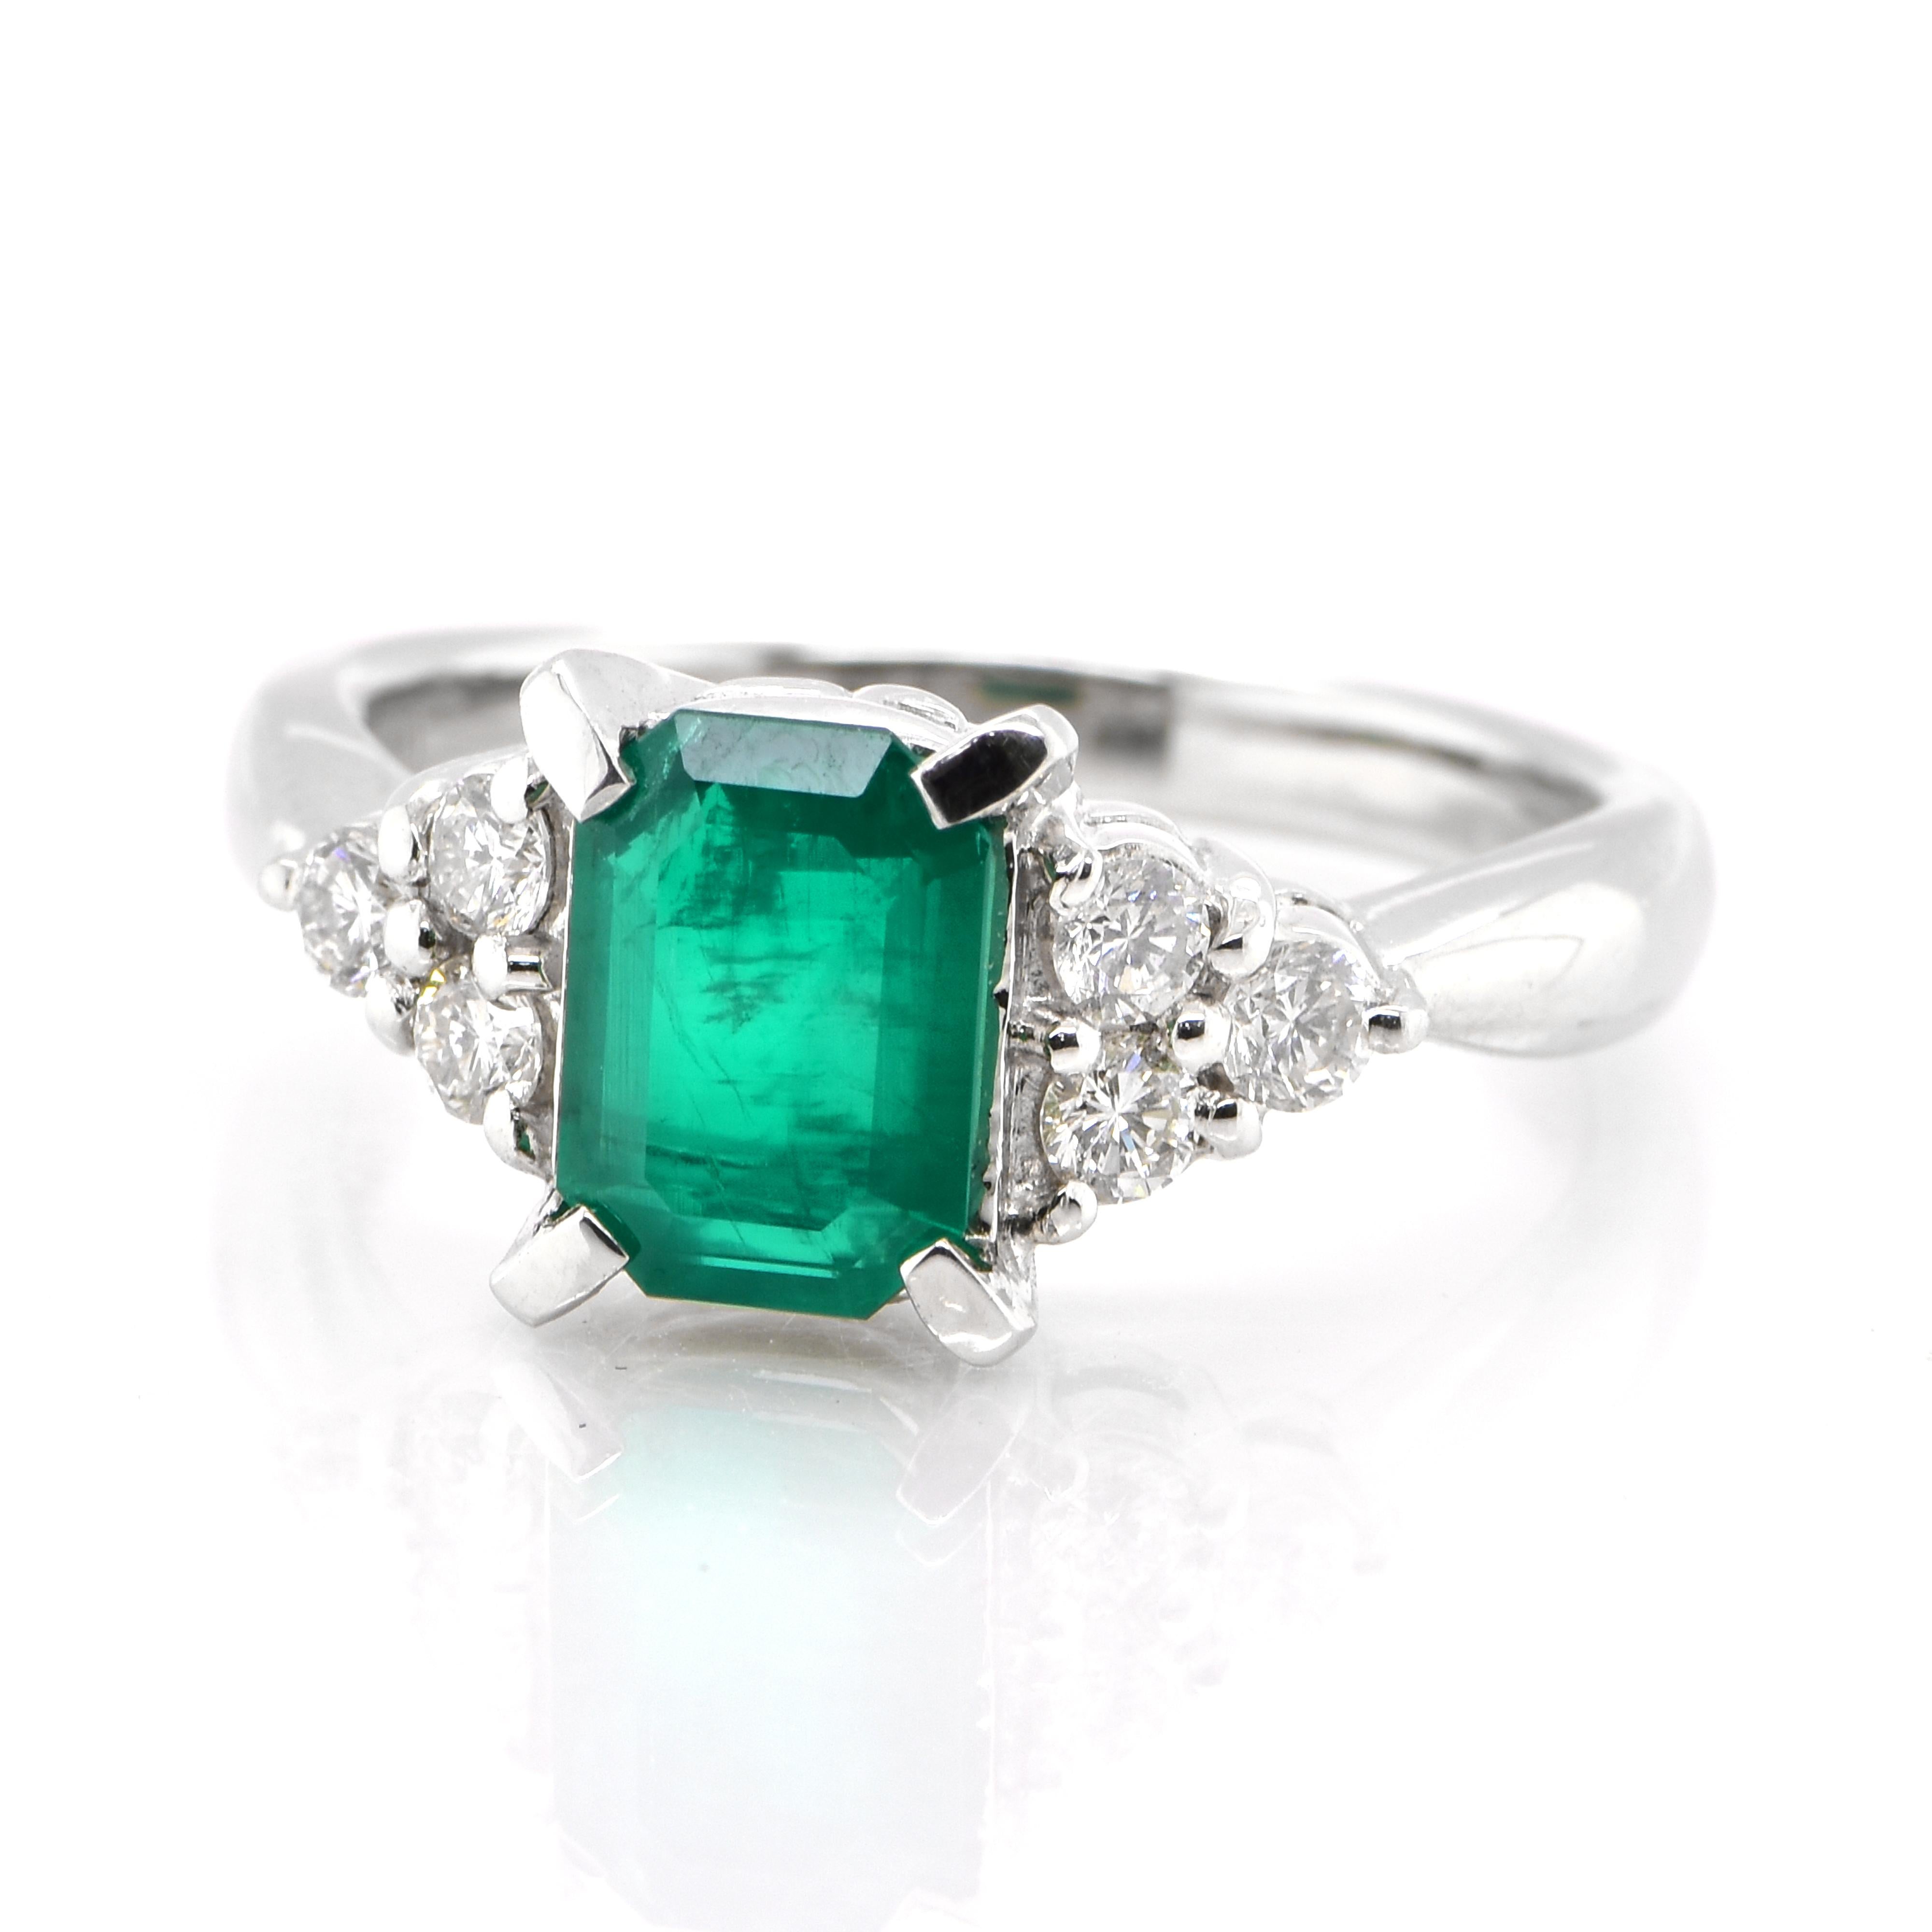 A stunning ring featuring a 1.29 Carat Natural Emerald and 0.324 Carats of Diamond Accents set in Platinum. People have admired emerald’s green for thousands of years. Emeralds have always been associated with the lushest landscapes and the richest